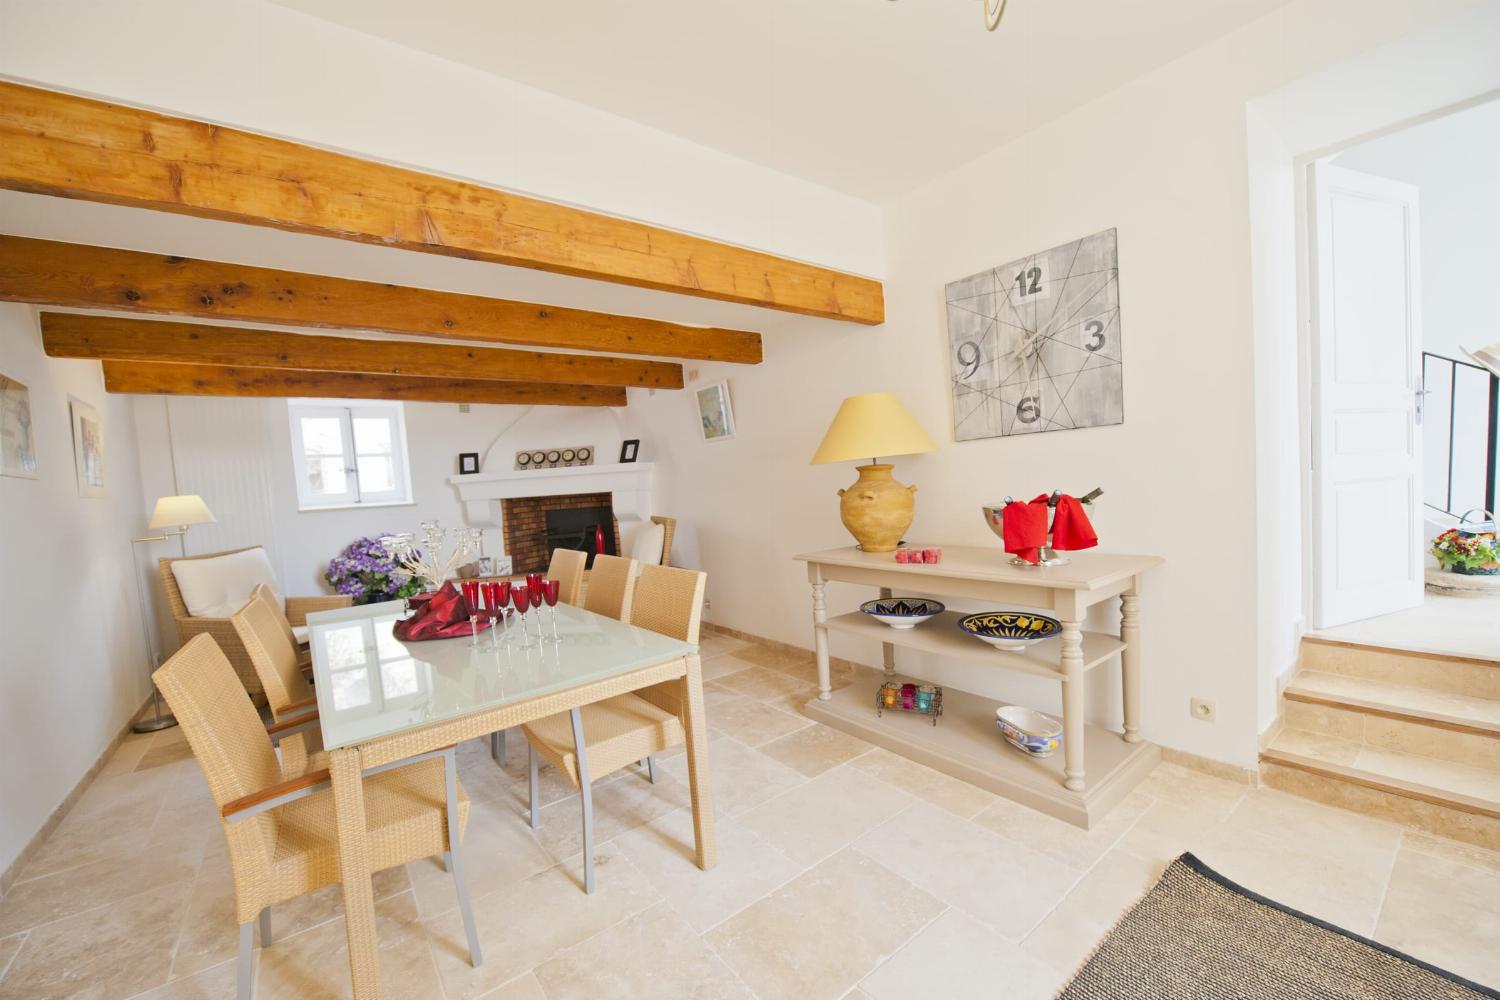 Dining room | Rental accommodation in Provence